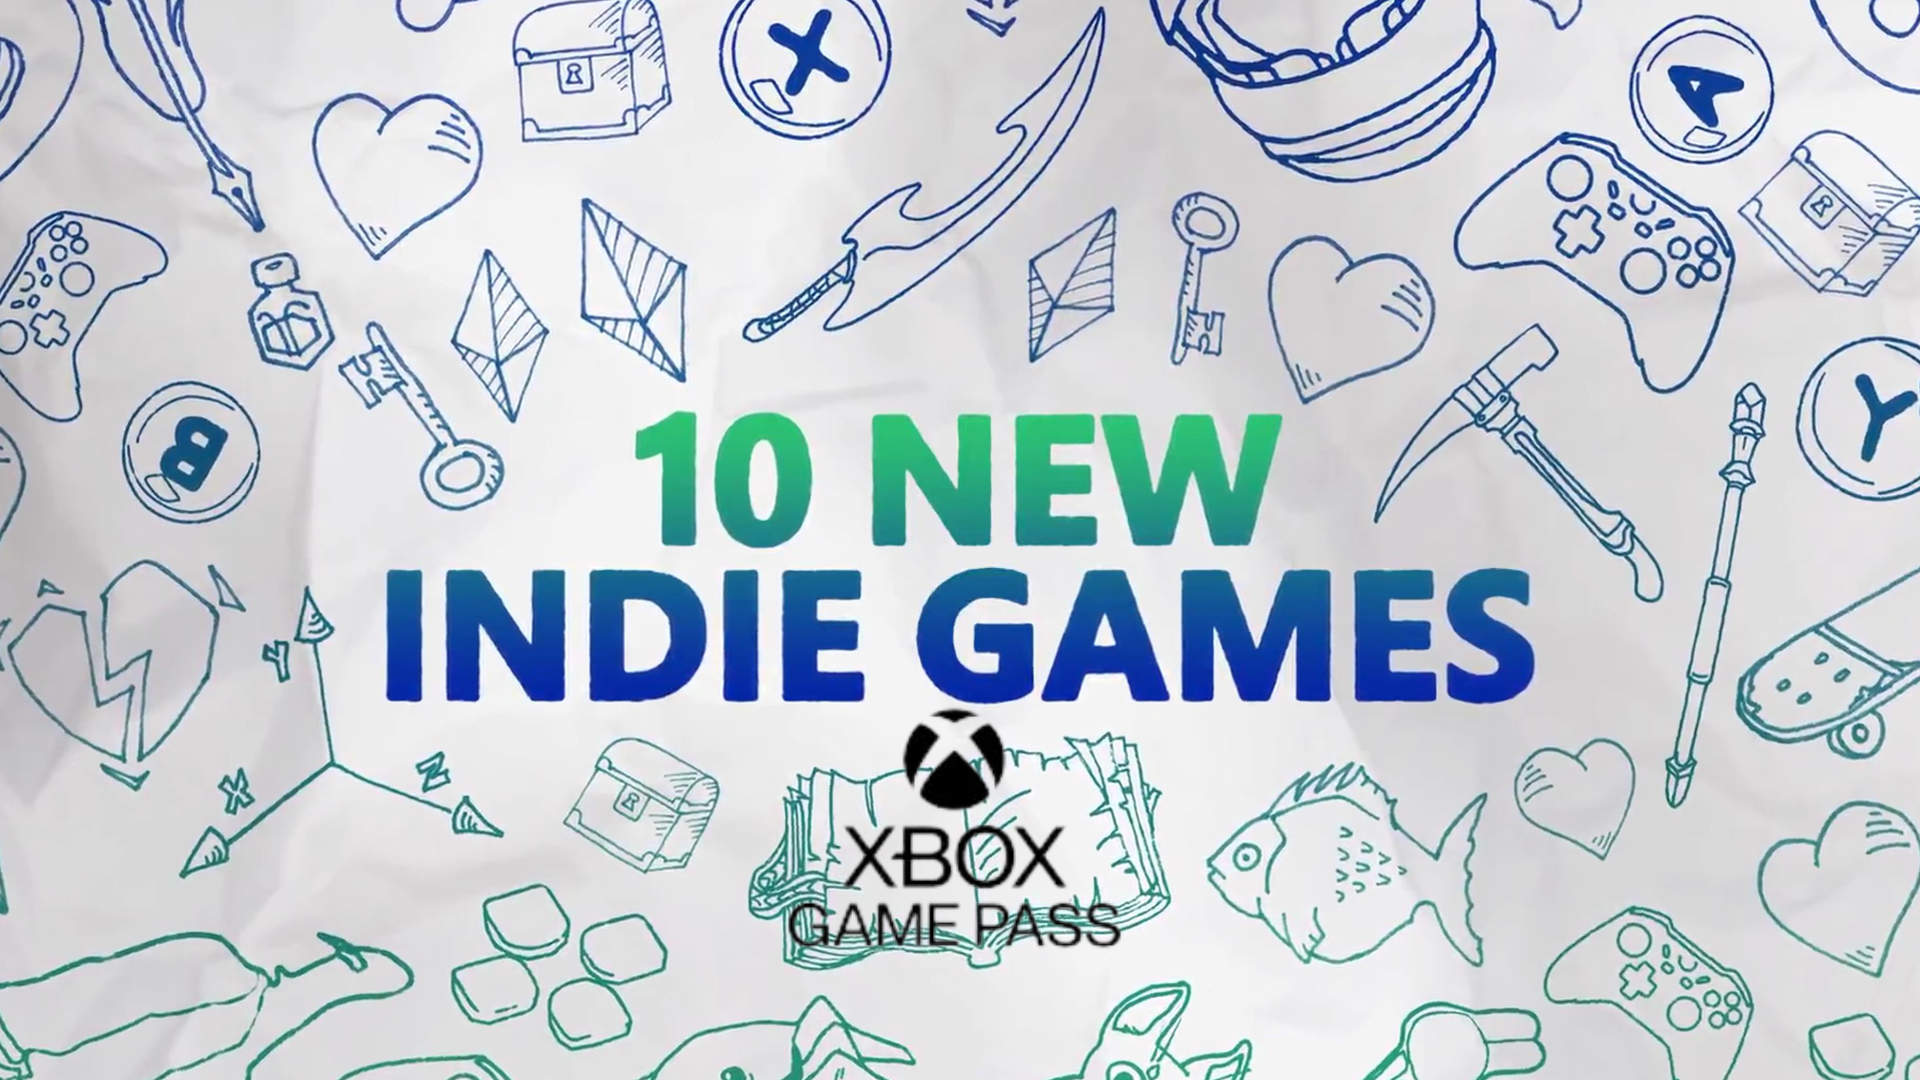 Xbox Game Pass: Indie-Game-Highlights im Gaming-Abo